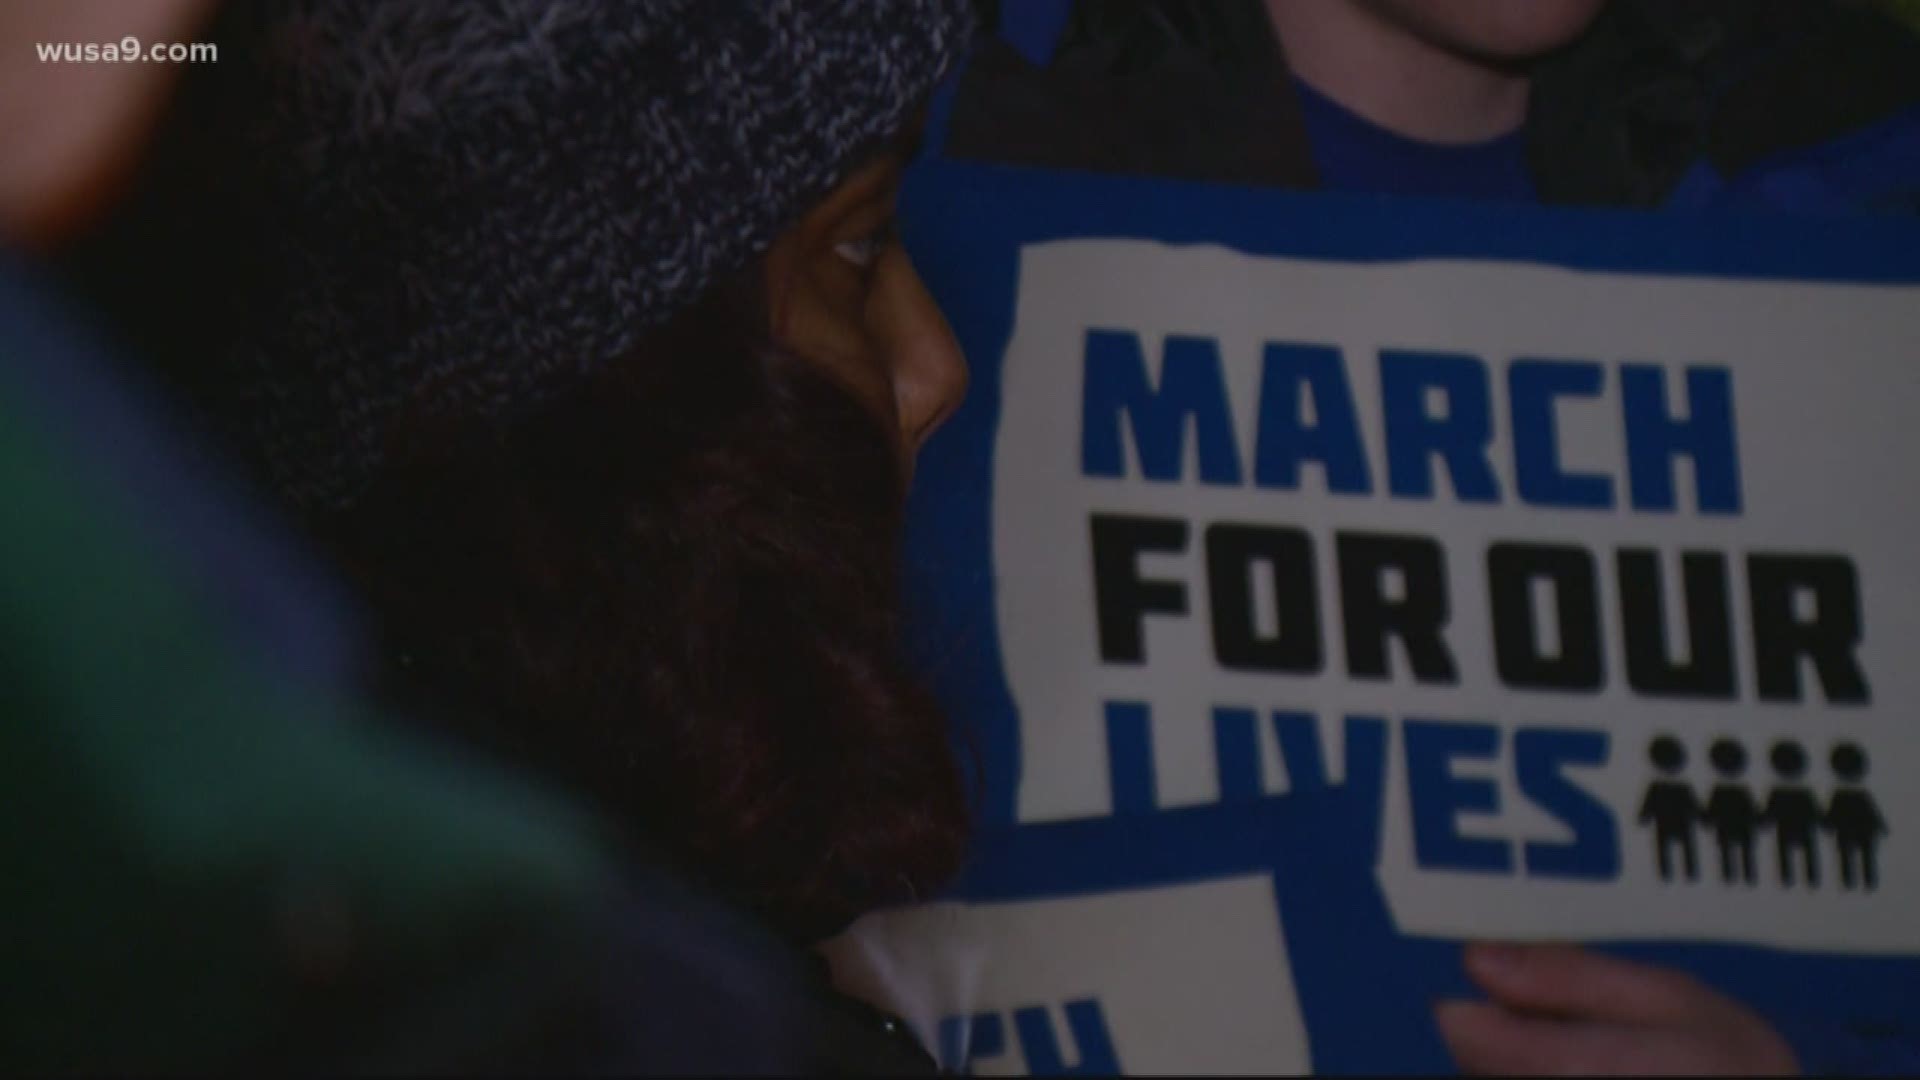 We took a trip down to Fairfax County to see how March For Our Lives is responding to pro-gun activists protesting Virginia legislators push for stricter gun laws.